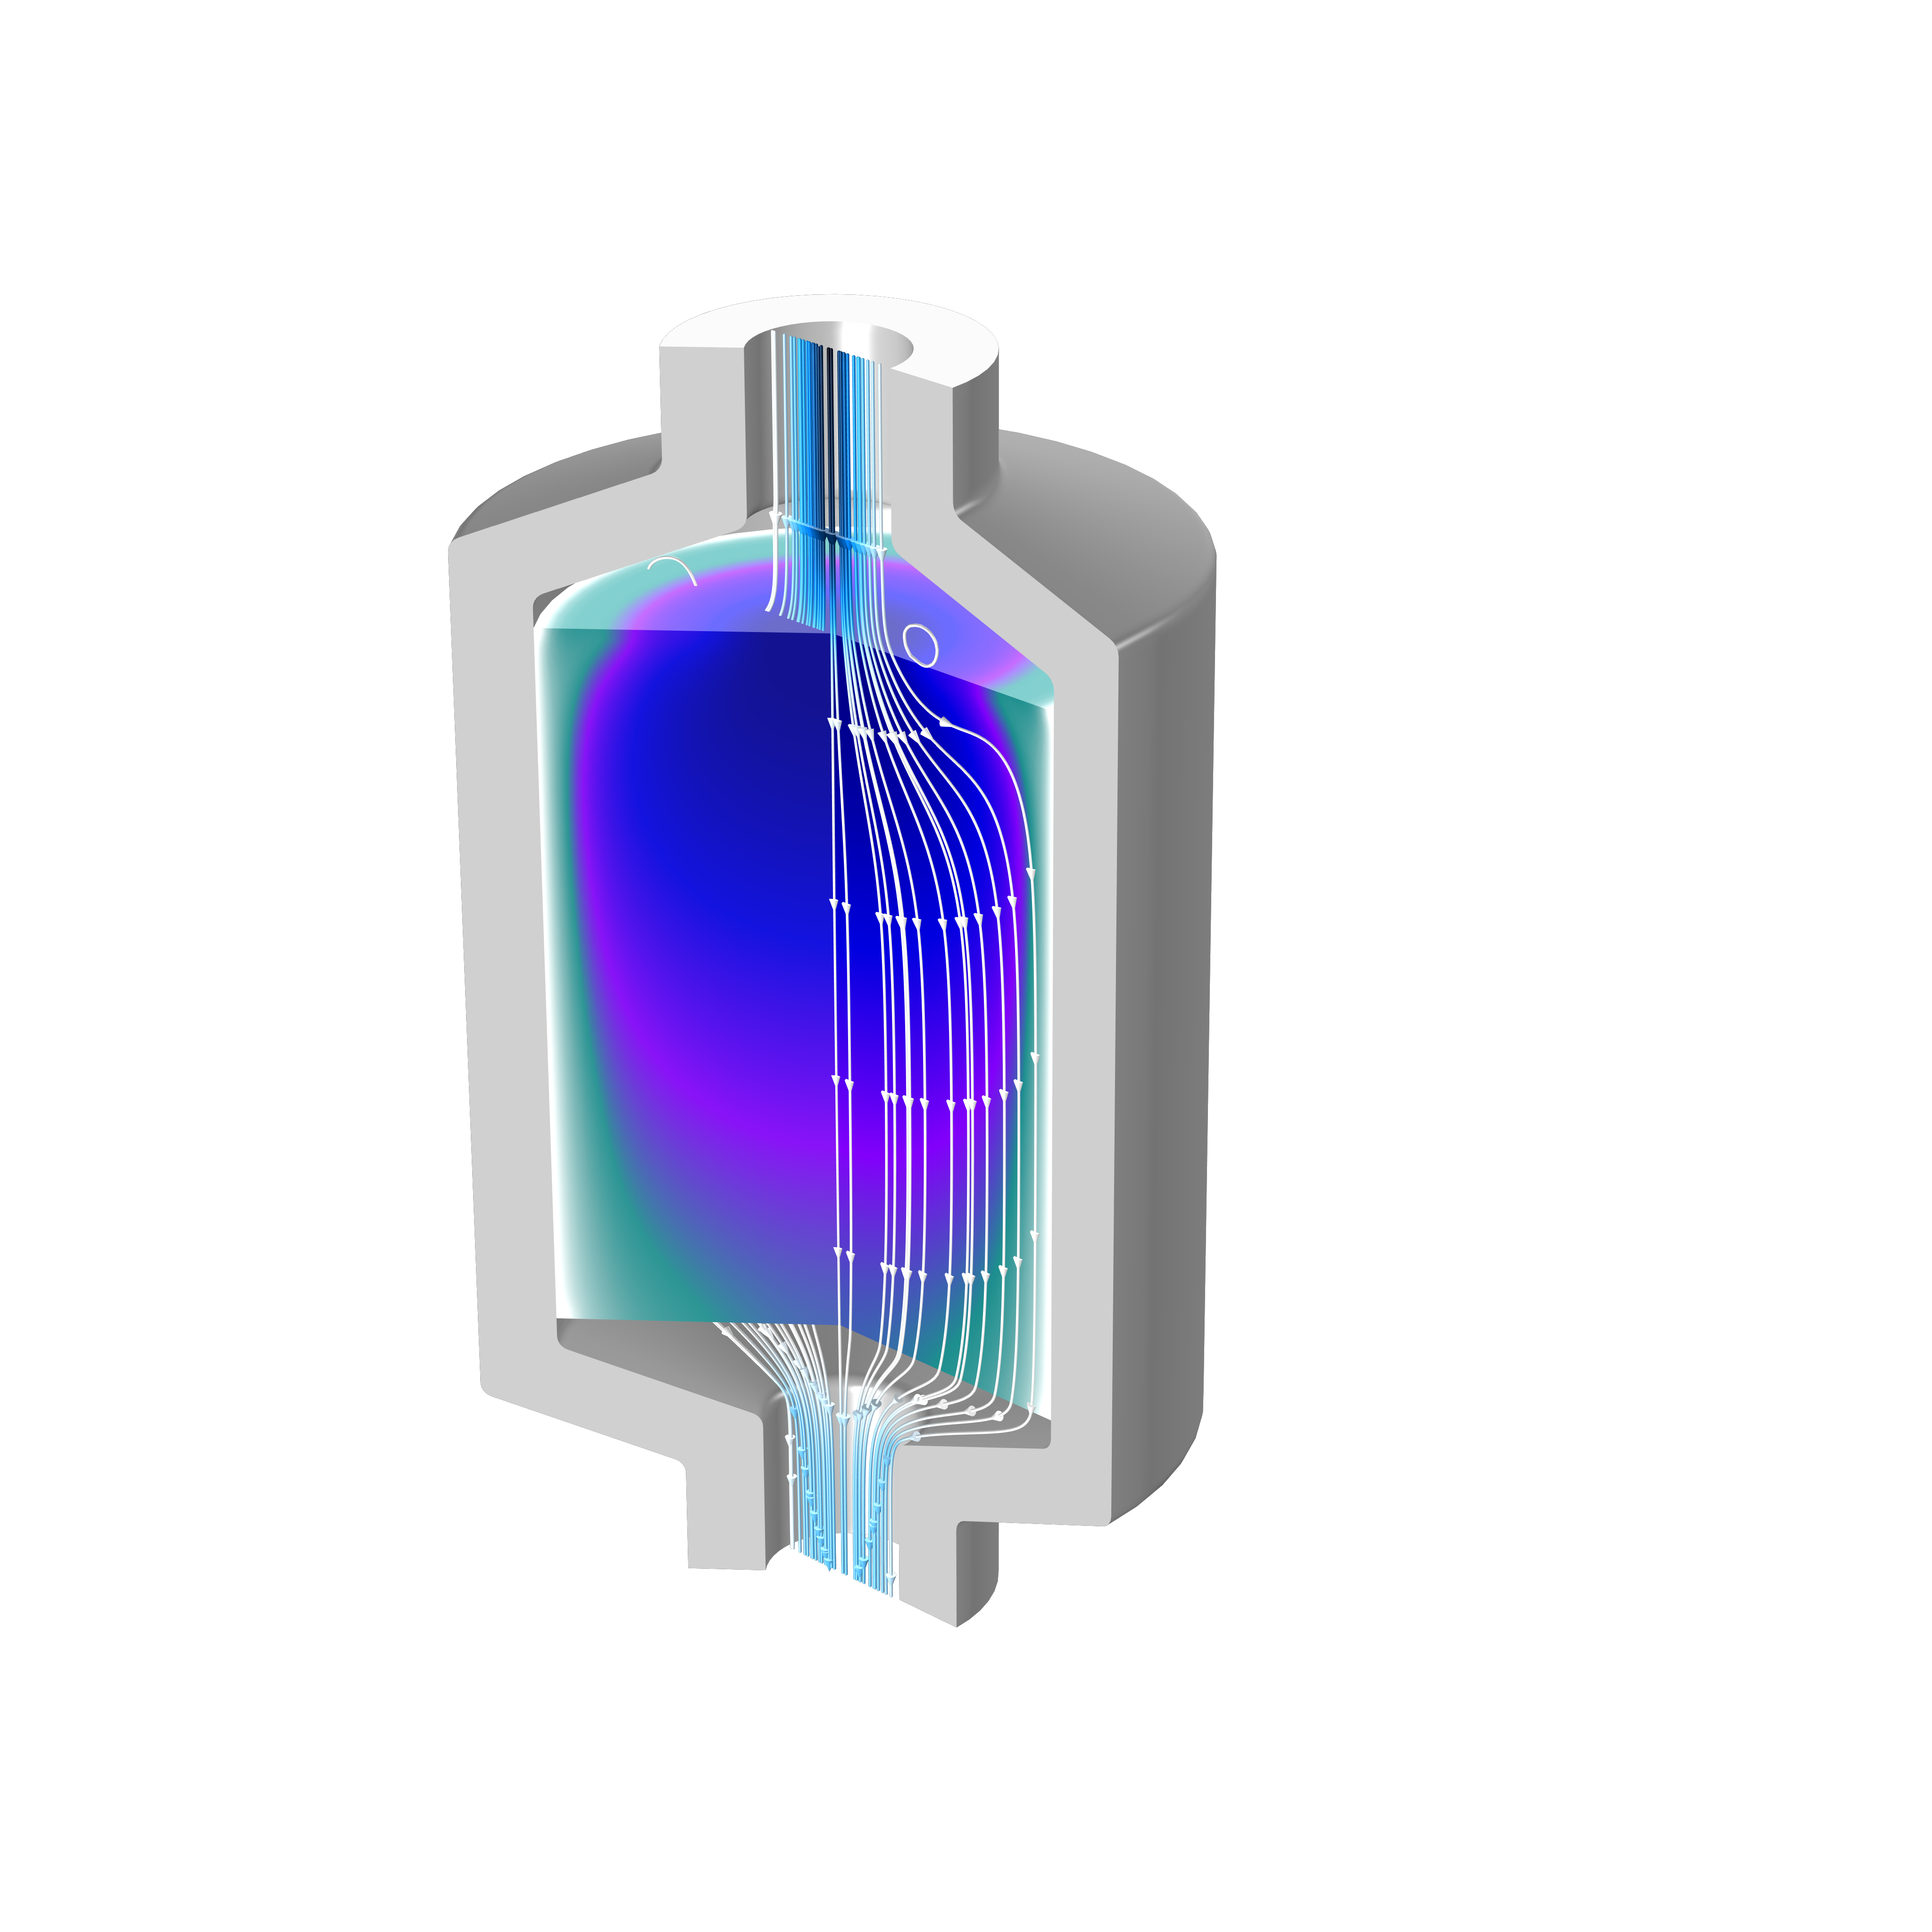 A gray tank model with porous media flow shown in a teal, purple, and blue color gradient and white streamlines.